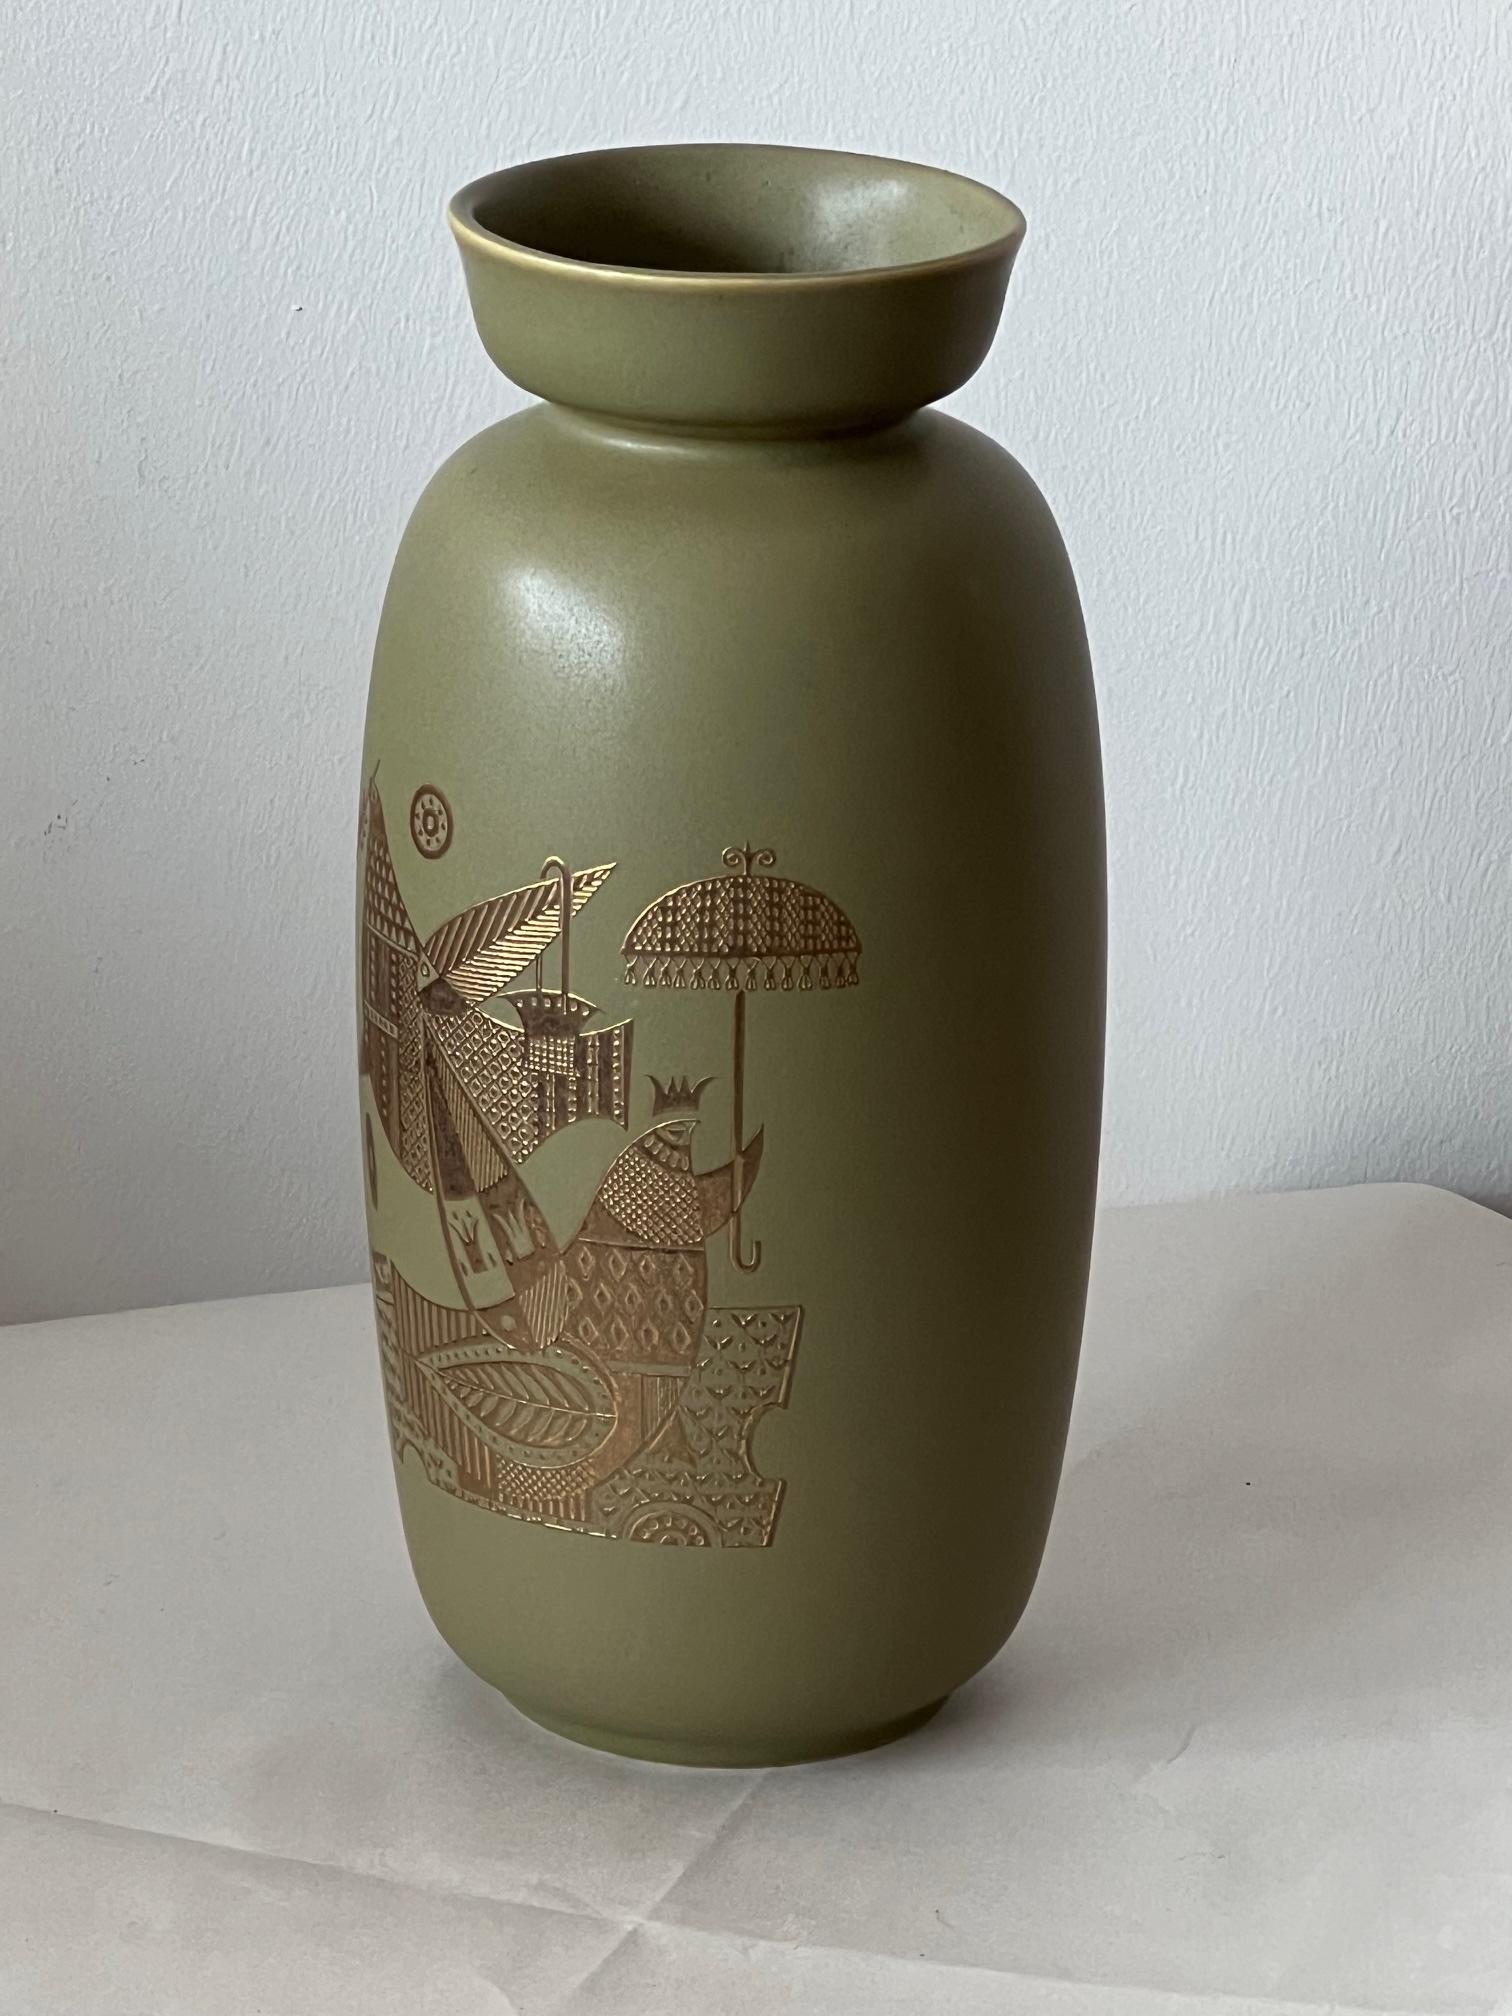 Georges Briard Ceramic Vase Hyalyn Pottery 1960's For Sale 4